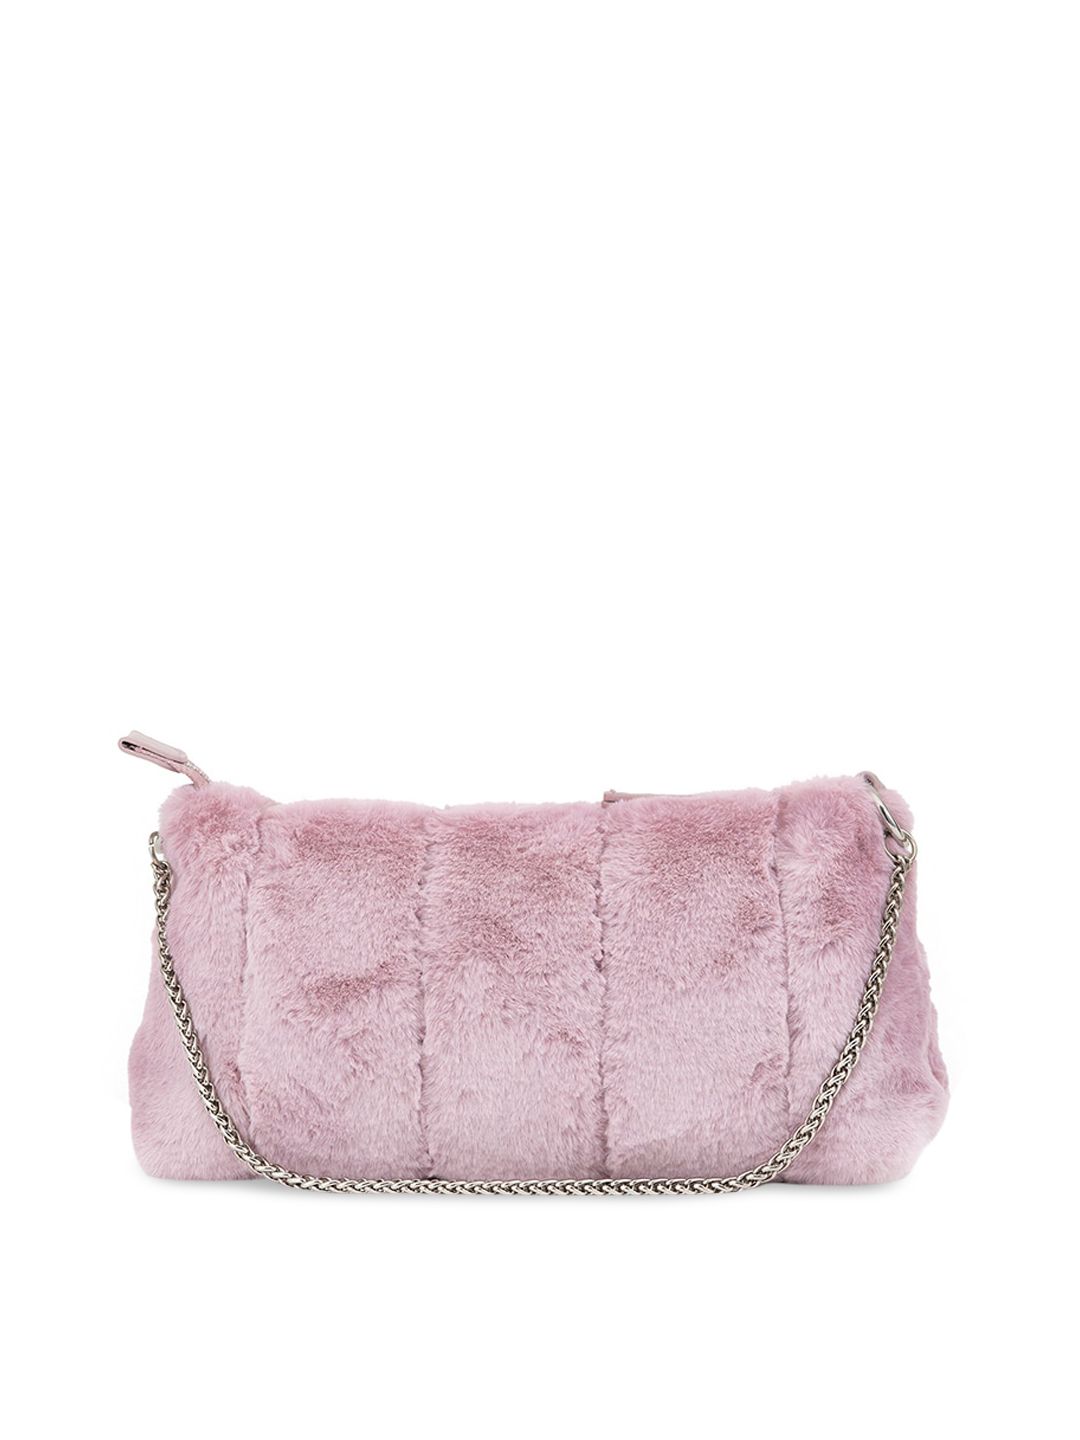 MIRAGGIO Pink Swagger Shoulder Bag Price in India